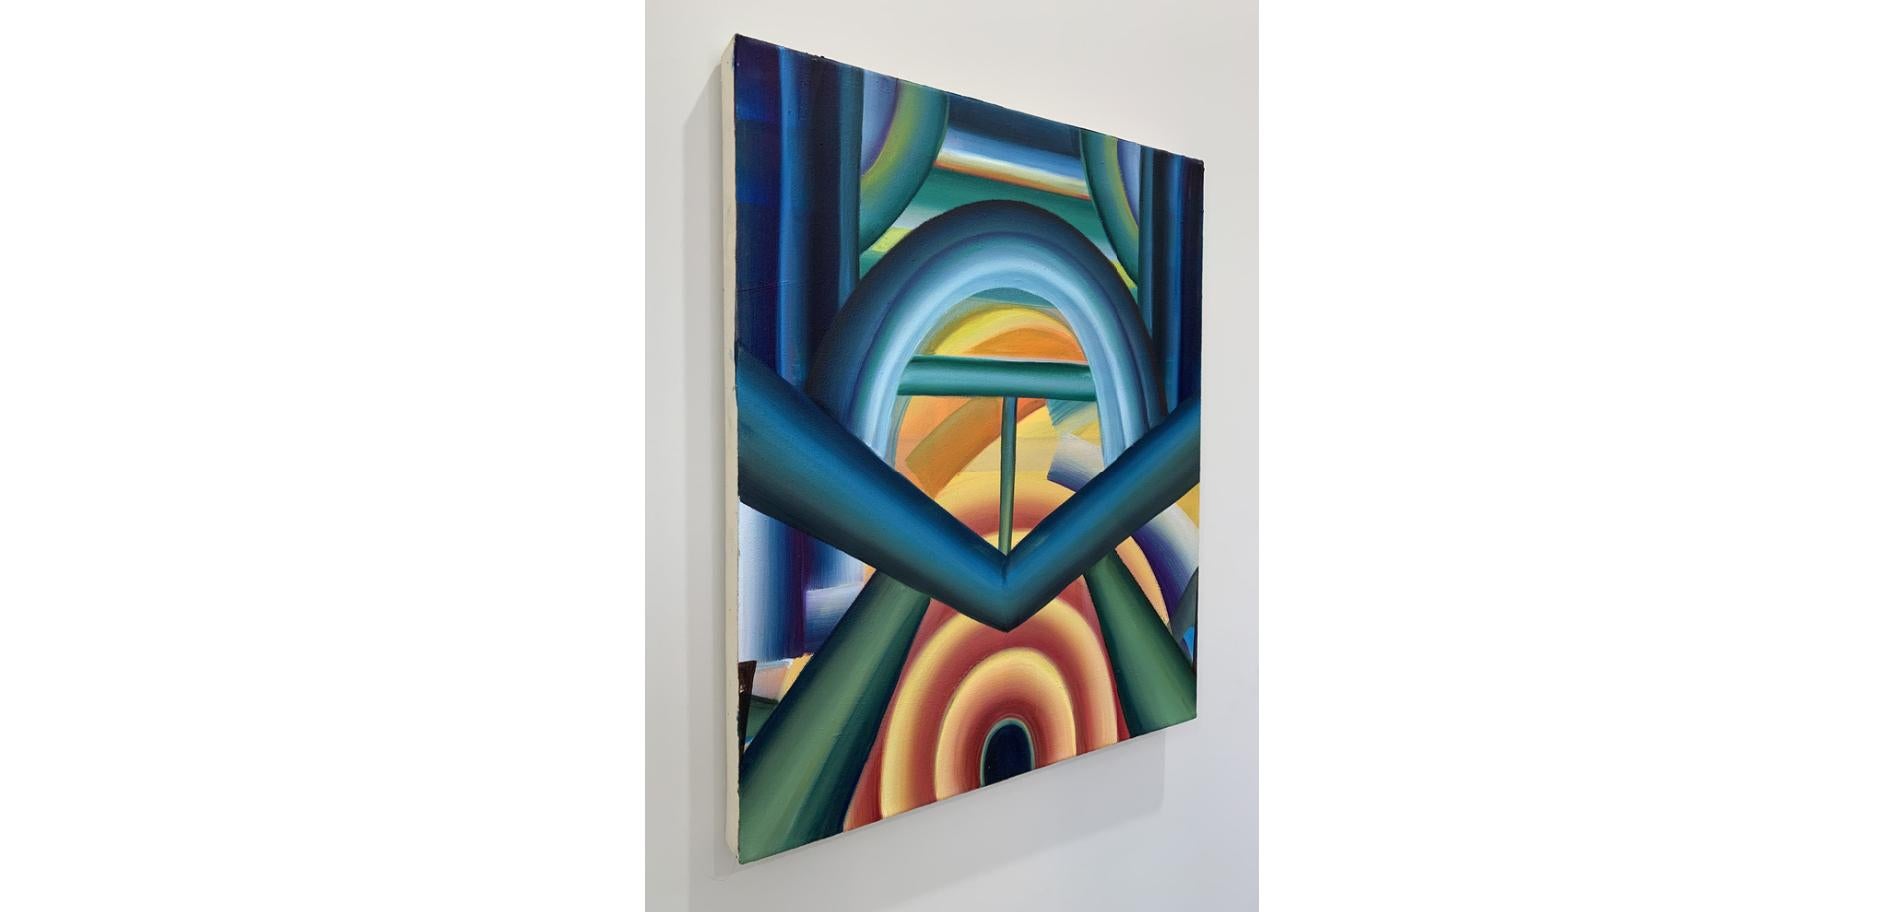 Oil on canvas, Abstract geometric pattern; minimalism; nonobjective art; golden yellow, light blue, teal, green, aqua, periwinkle, peach, orange, rust red, burgundy; geometric abstraction

Hand-signed by artist
Framing available upon